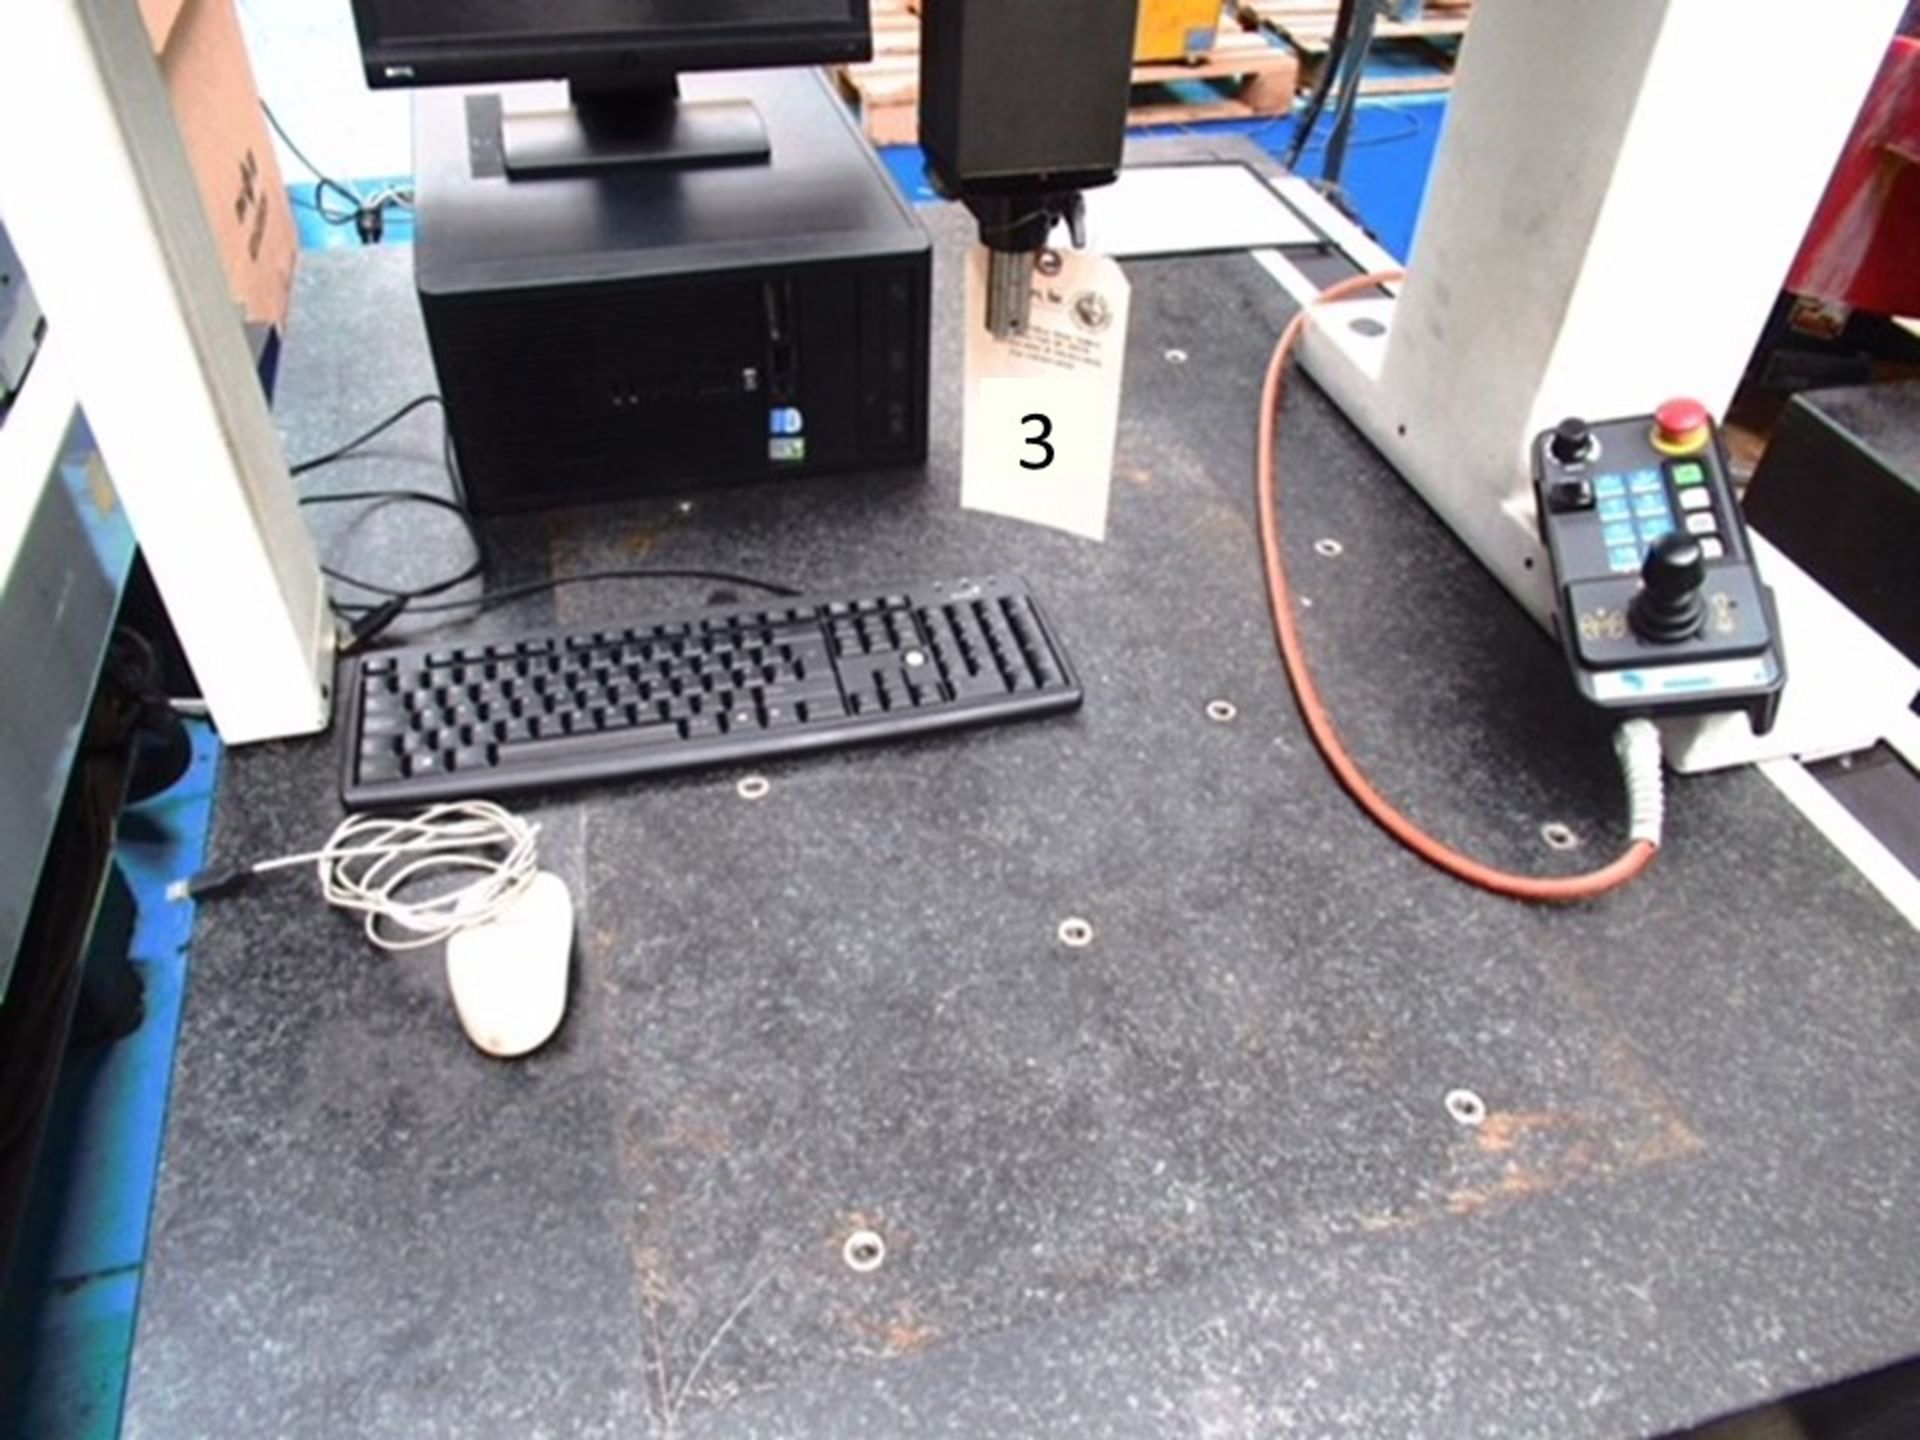 DEA Mistral Model 07/07/05 CNC Coordinate Measuring Machine with 50" x 36" Granite Work Table, - Image 3 of 3